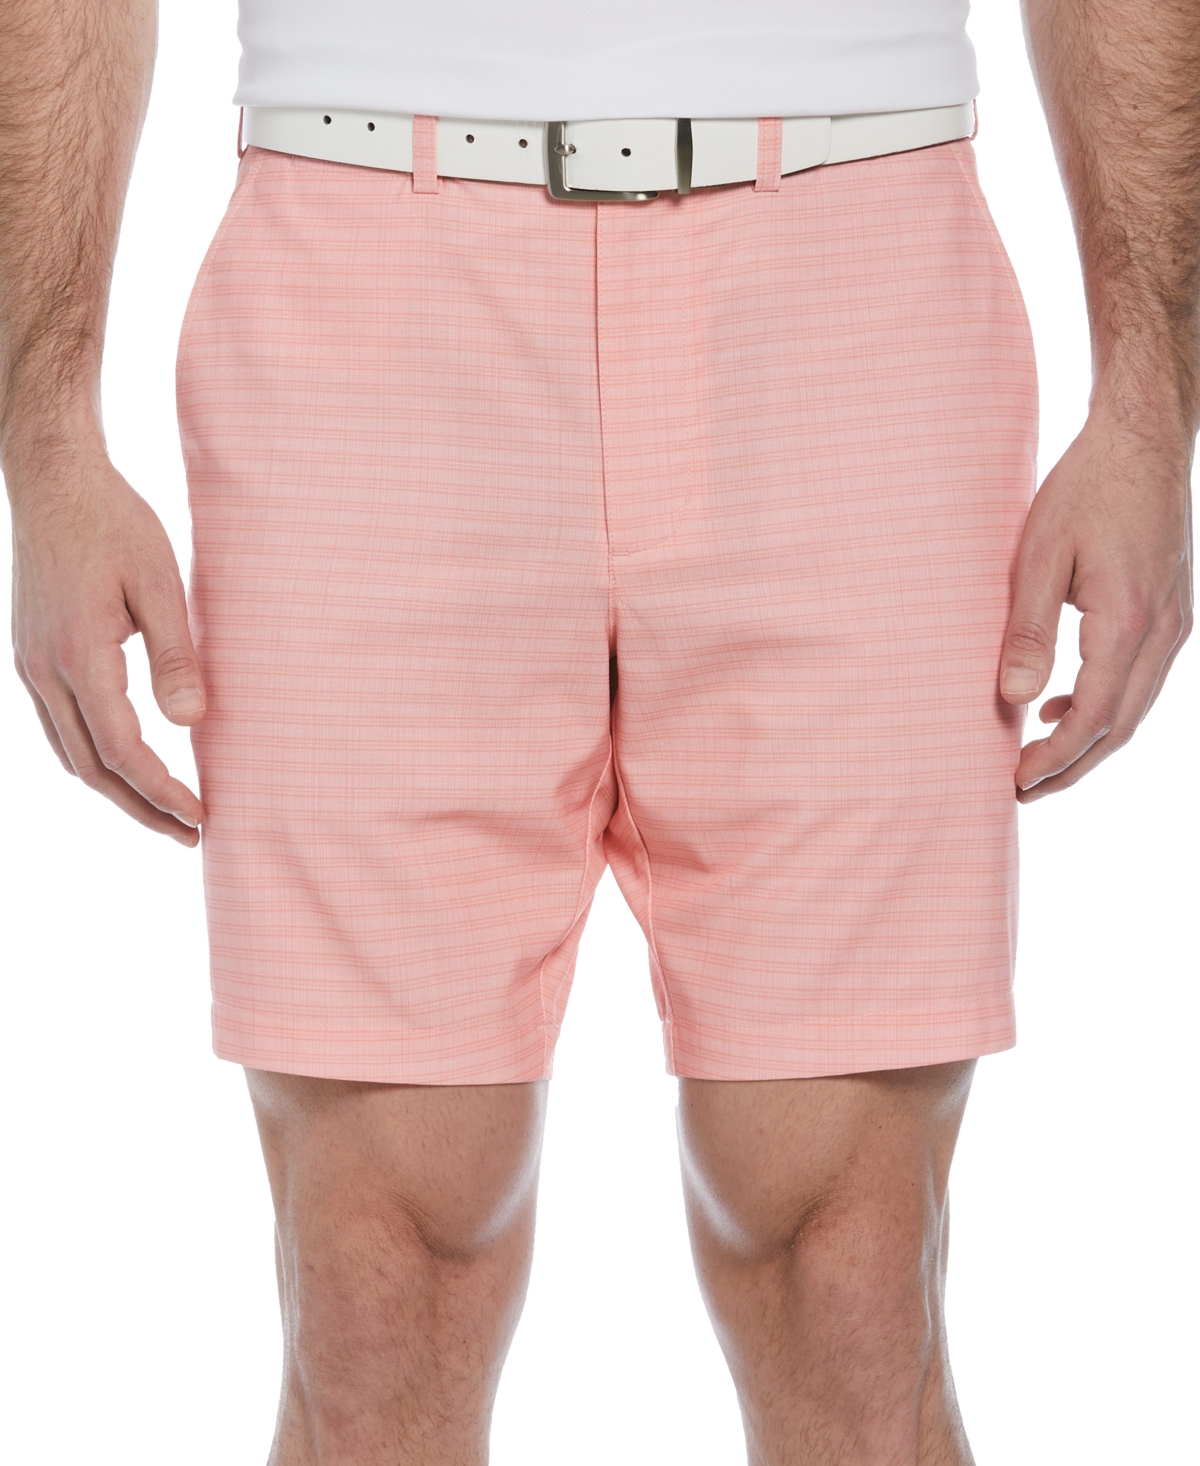 Pga Tour Men's Striped 8" Golf Shorts In Shell Pink